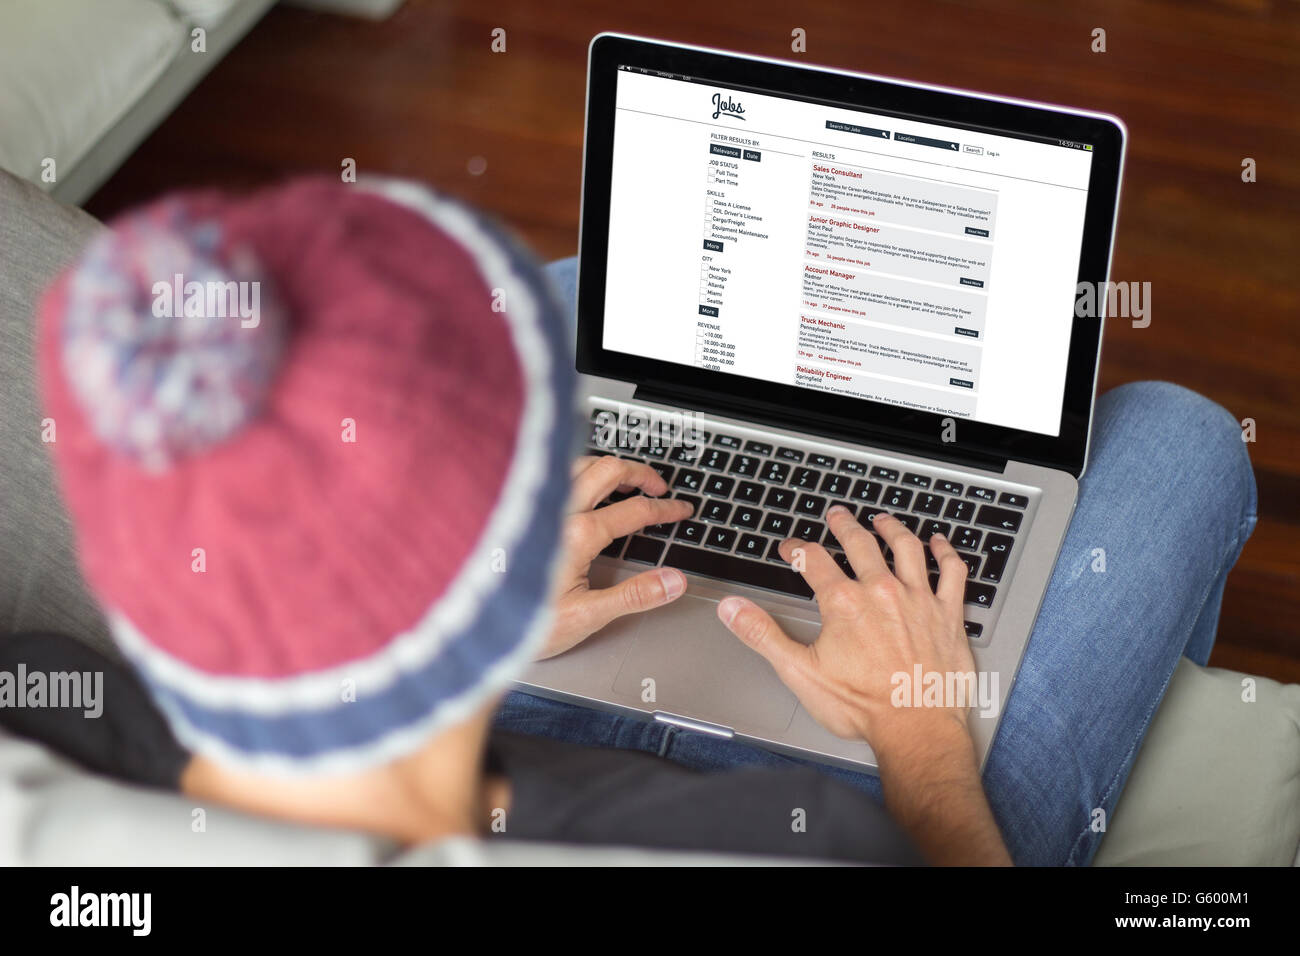 Applicant browsing job application. All screen graphics are made up. Stock Photo